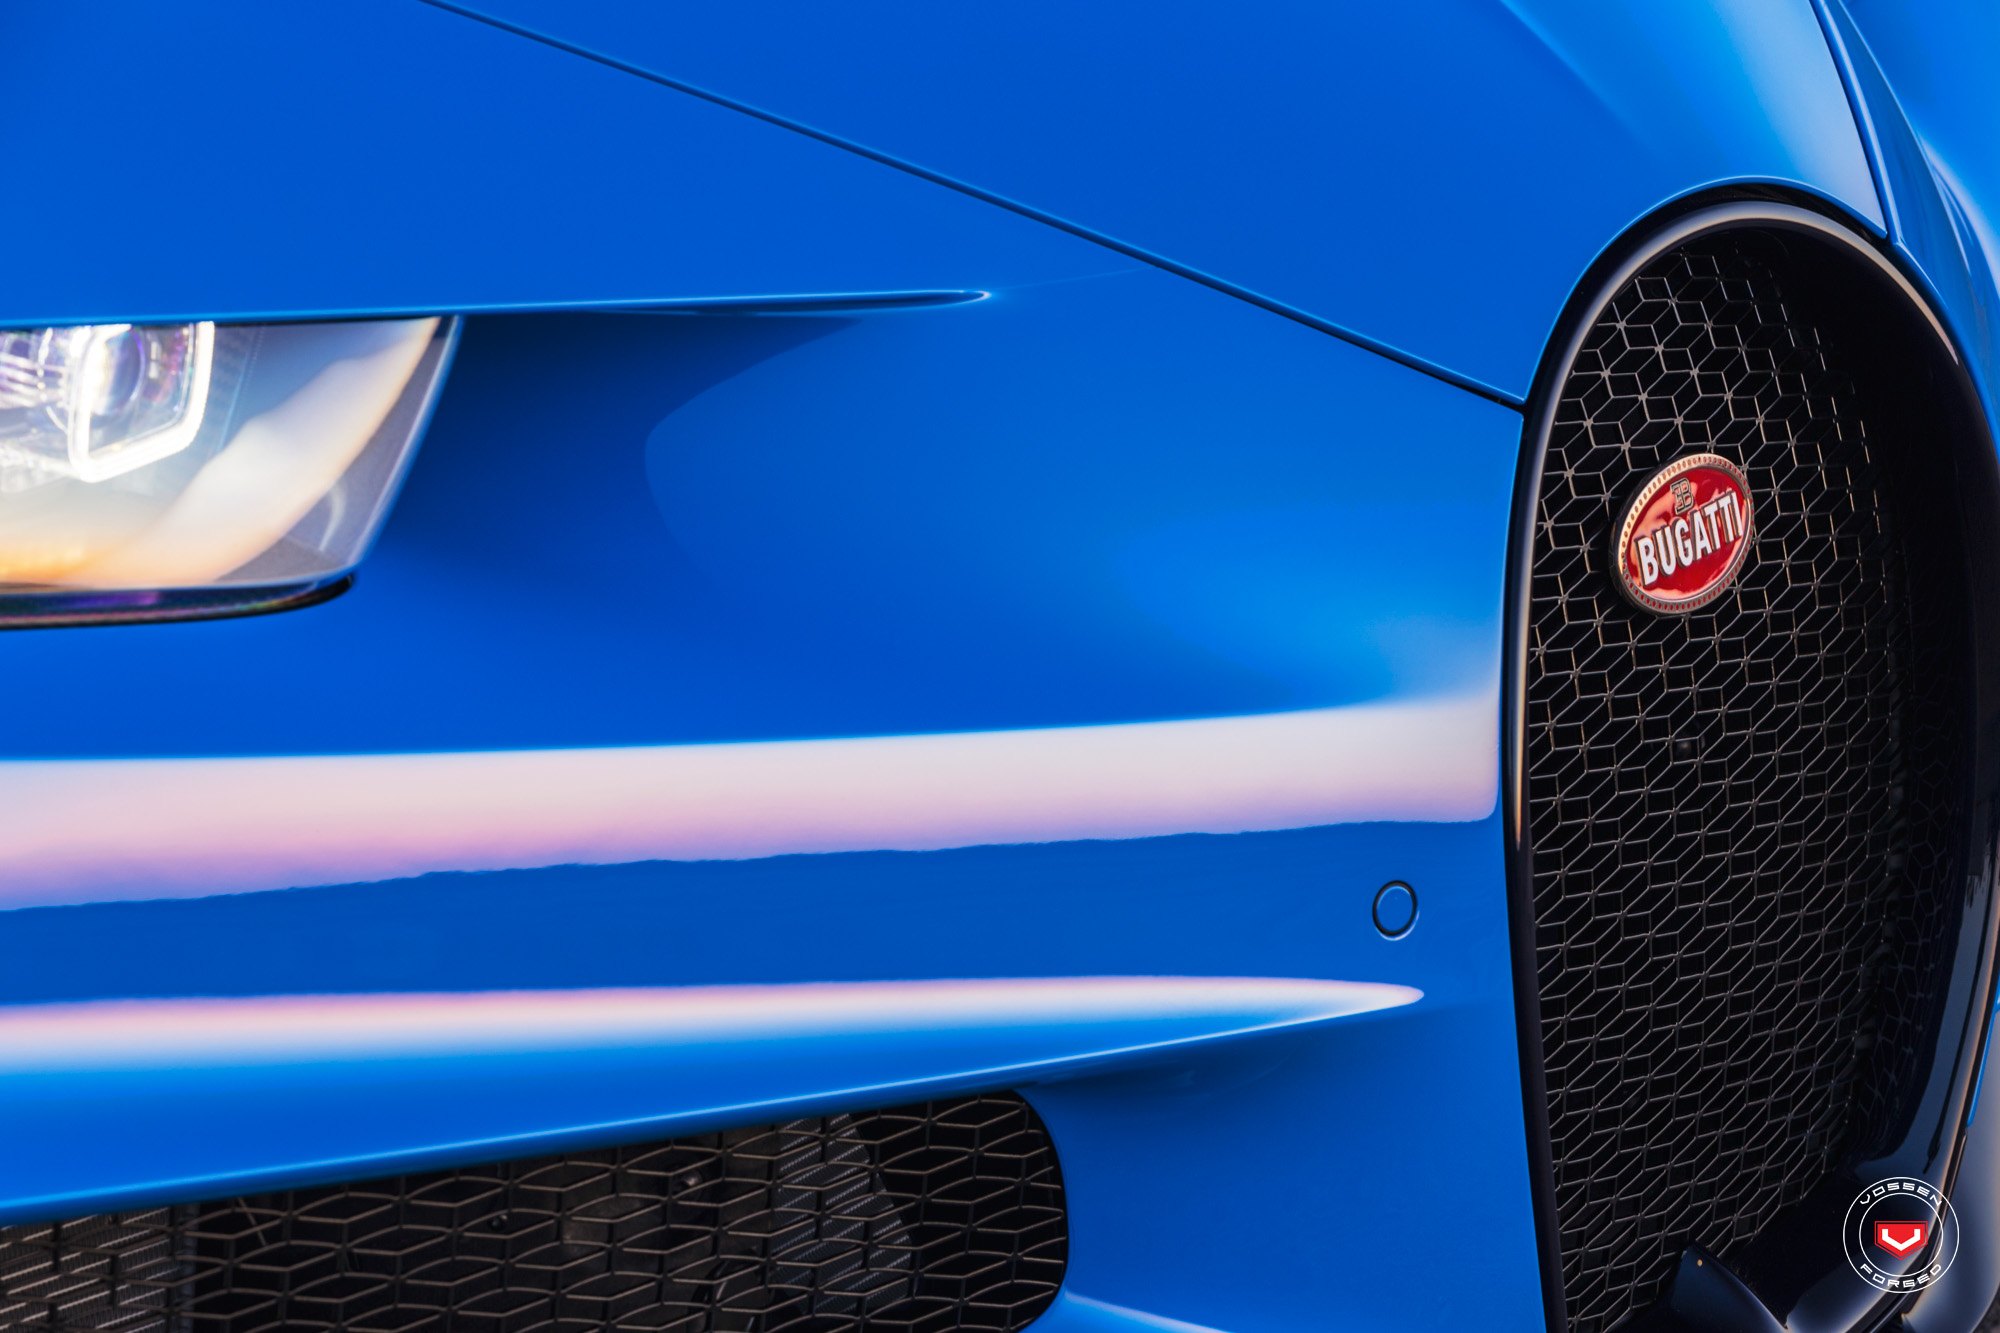 Blacked Out Mesh Grille on Blue Bugatti Chiron - Photo by Vossen